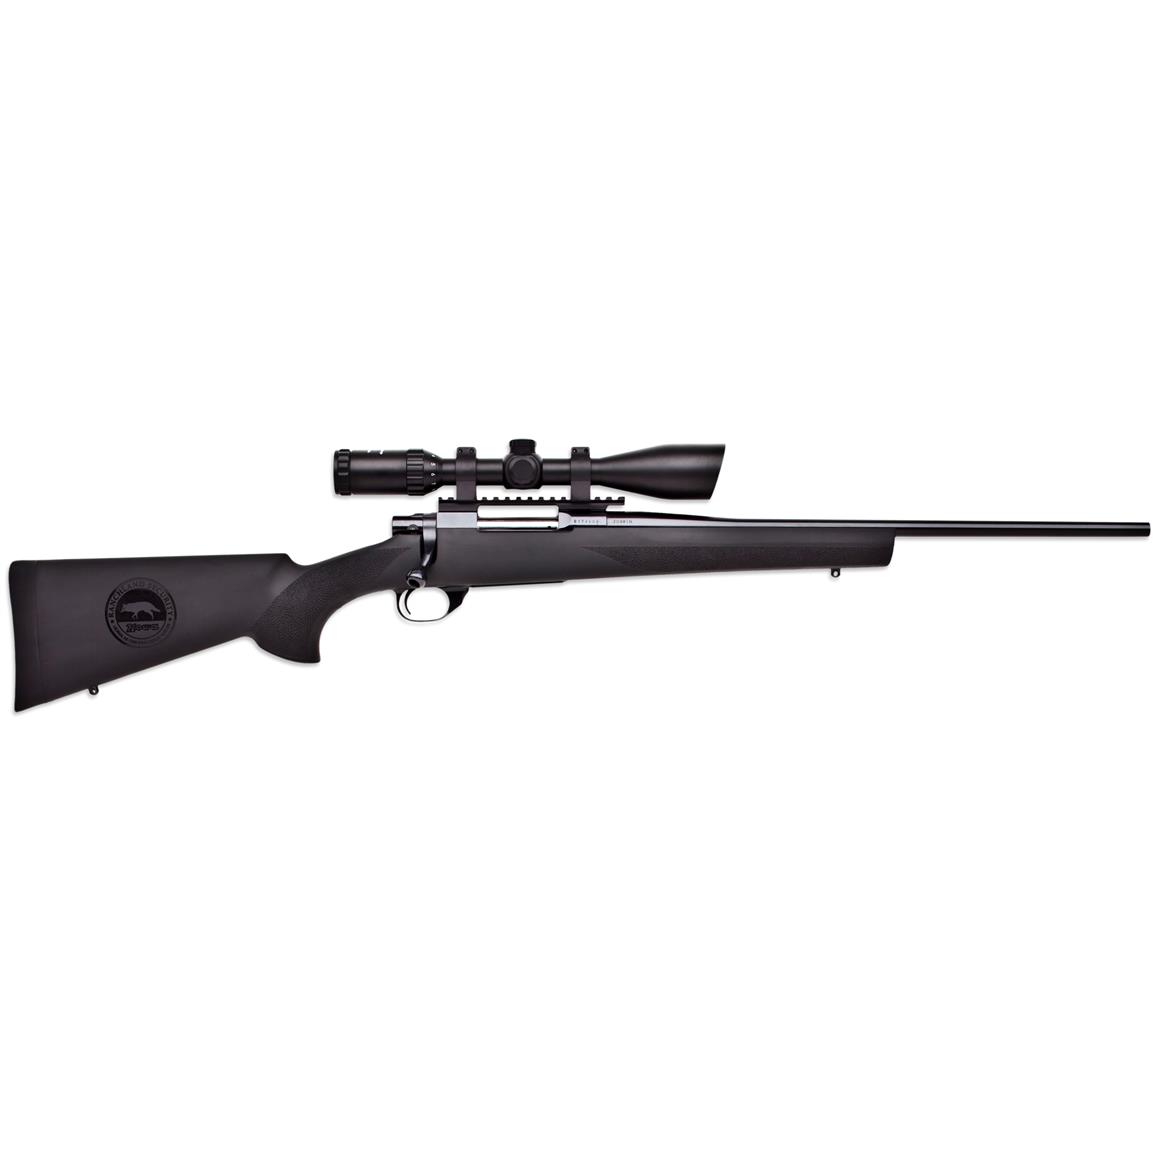 LSI Howa Hogue Ranchland Package, Bolt Action, .223 Remington, Nikko Stirling Scope, 5+1 Rounds